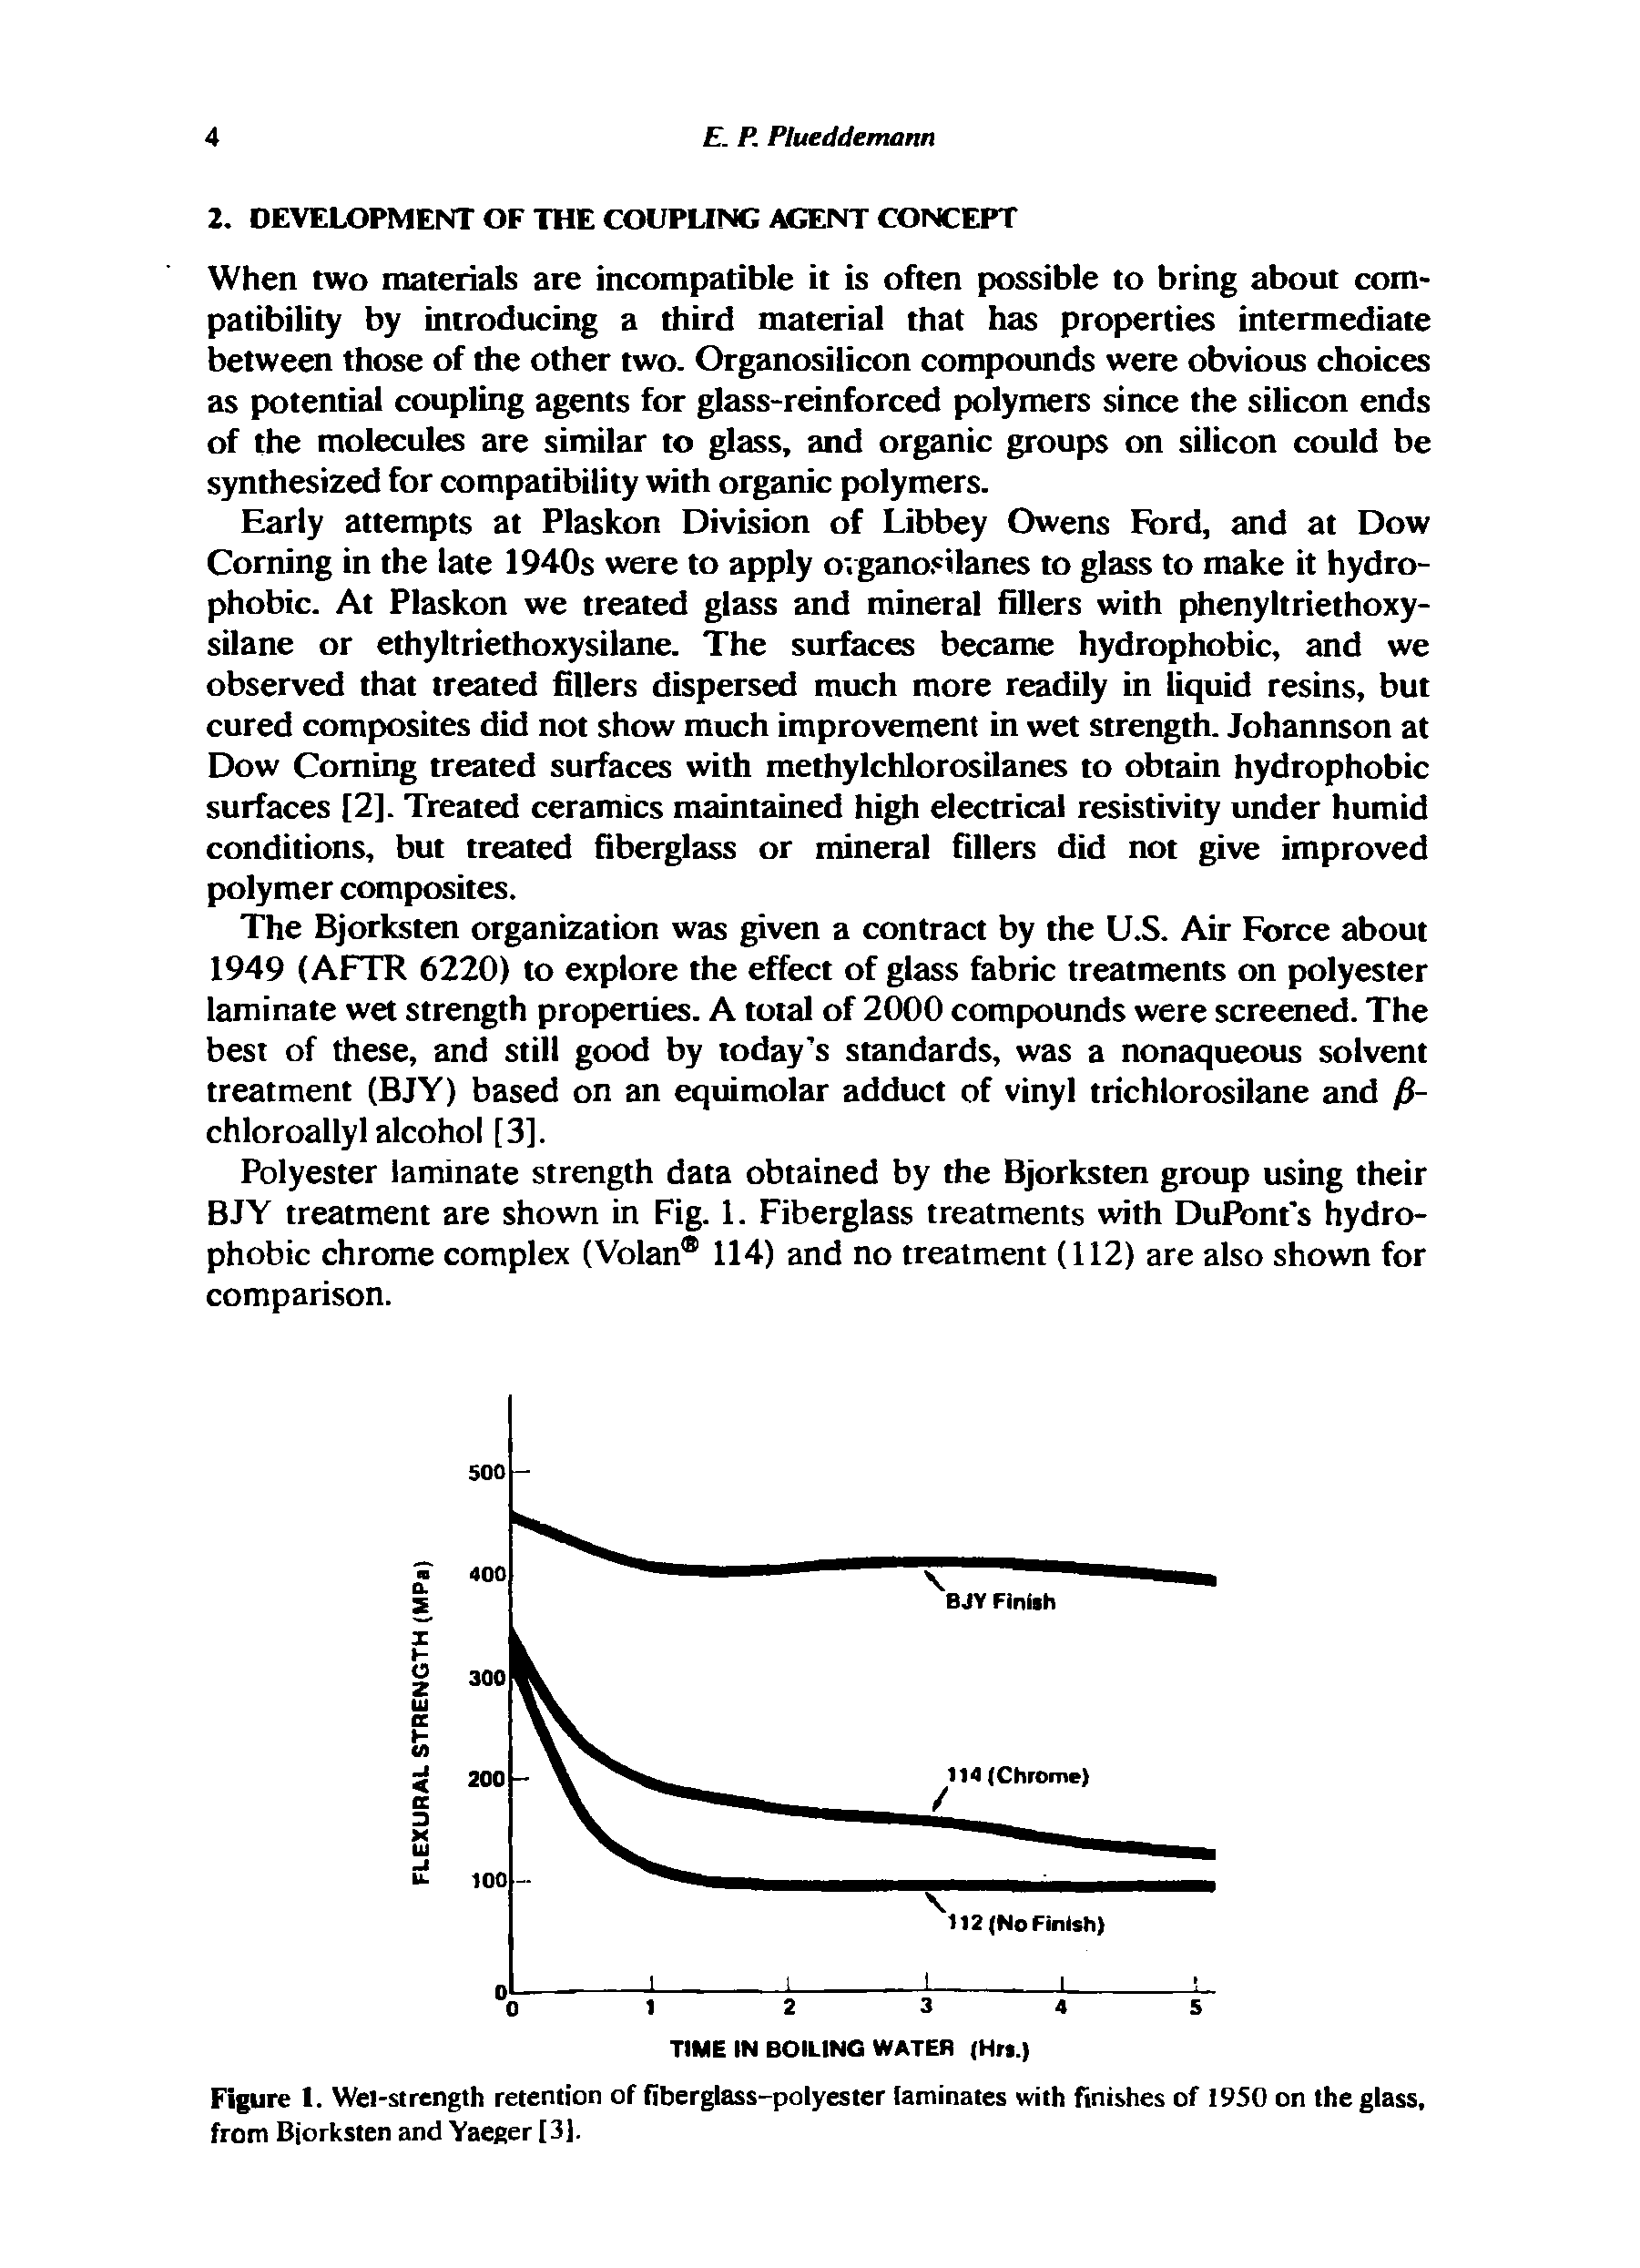 Figure 1. Wel-strength retention of fiberglass-polyester laminates with finishes of 1950 on the glass, from Bjorksten and Yaeger [3].